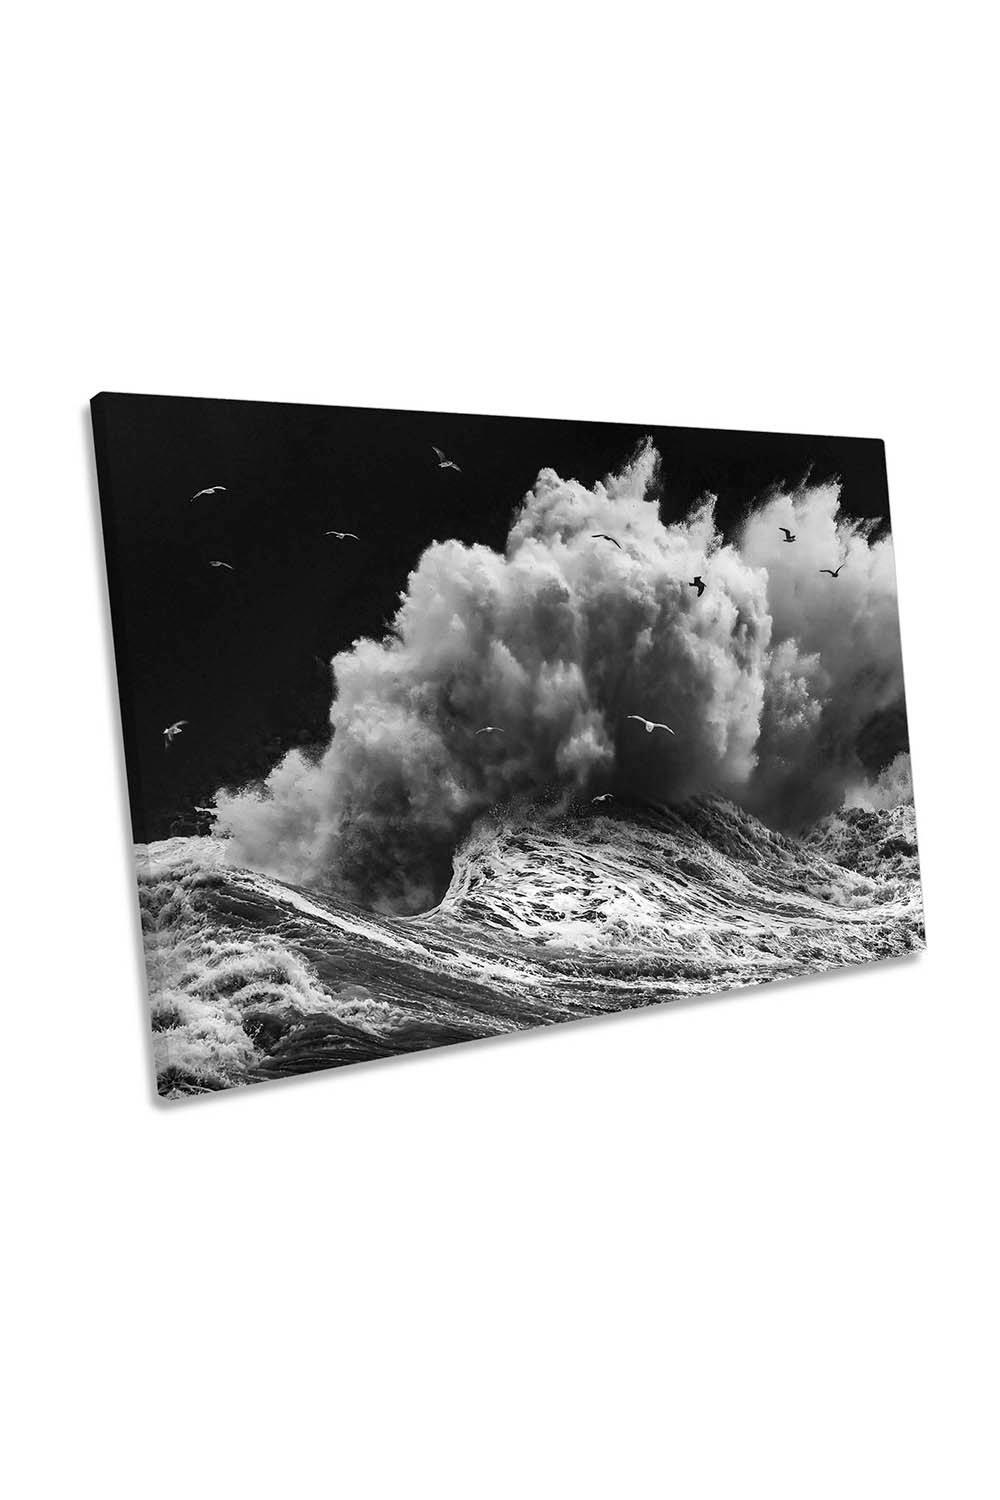 Birds in the Storm Crashing Wave Ocean Surf Canvas Wall Art Picture Print